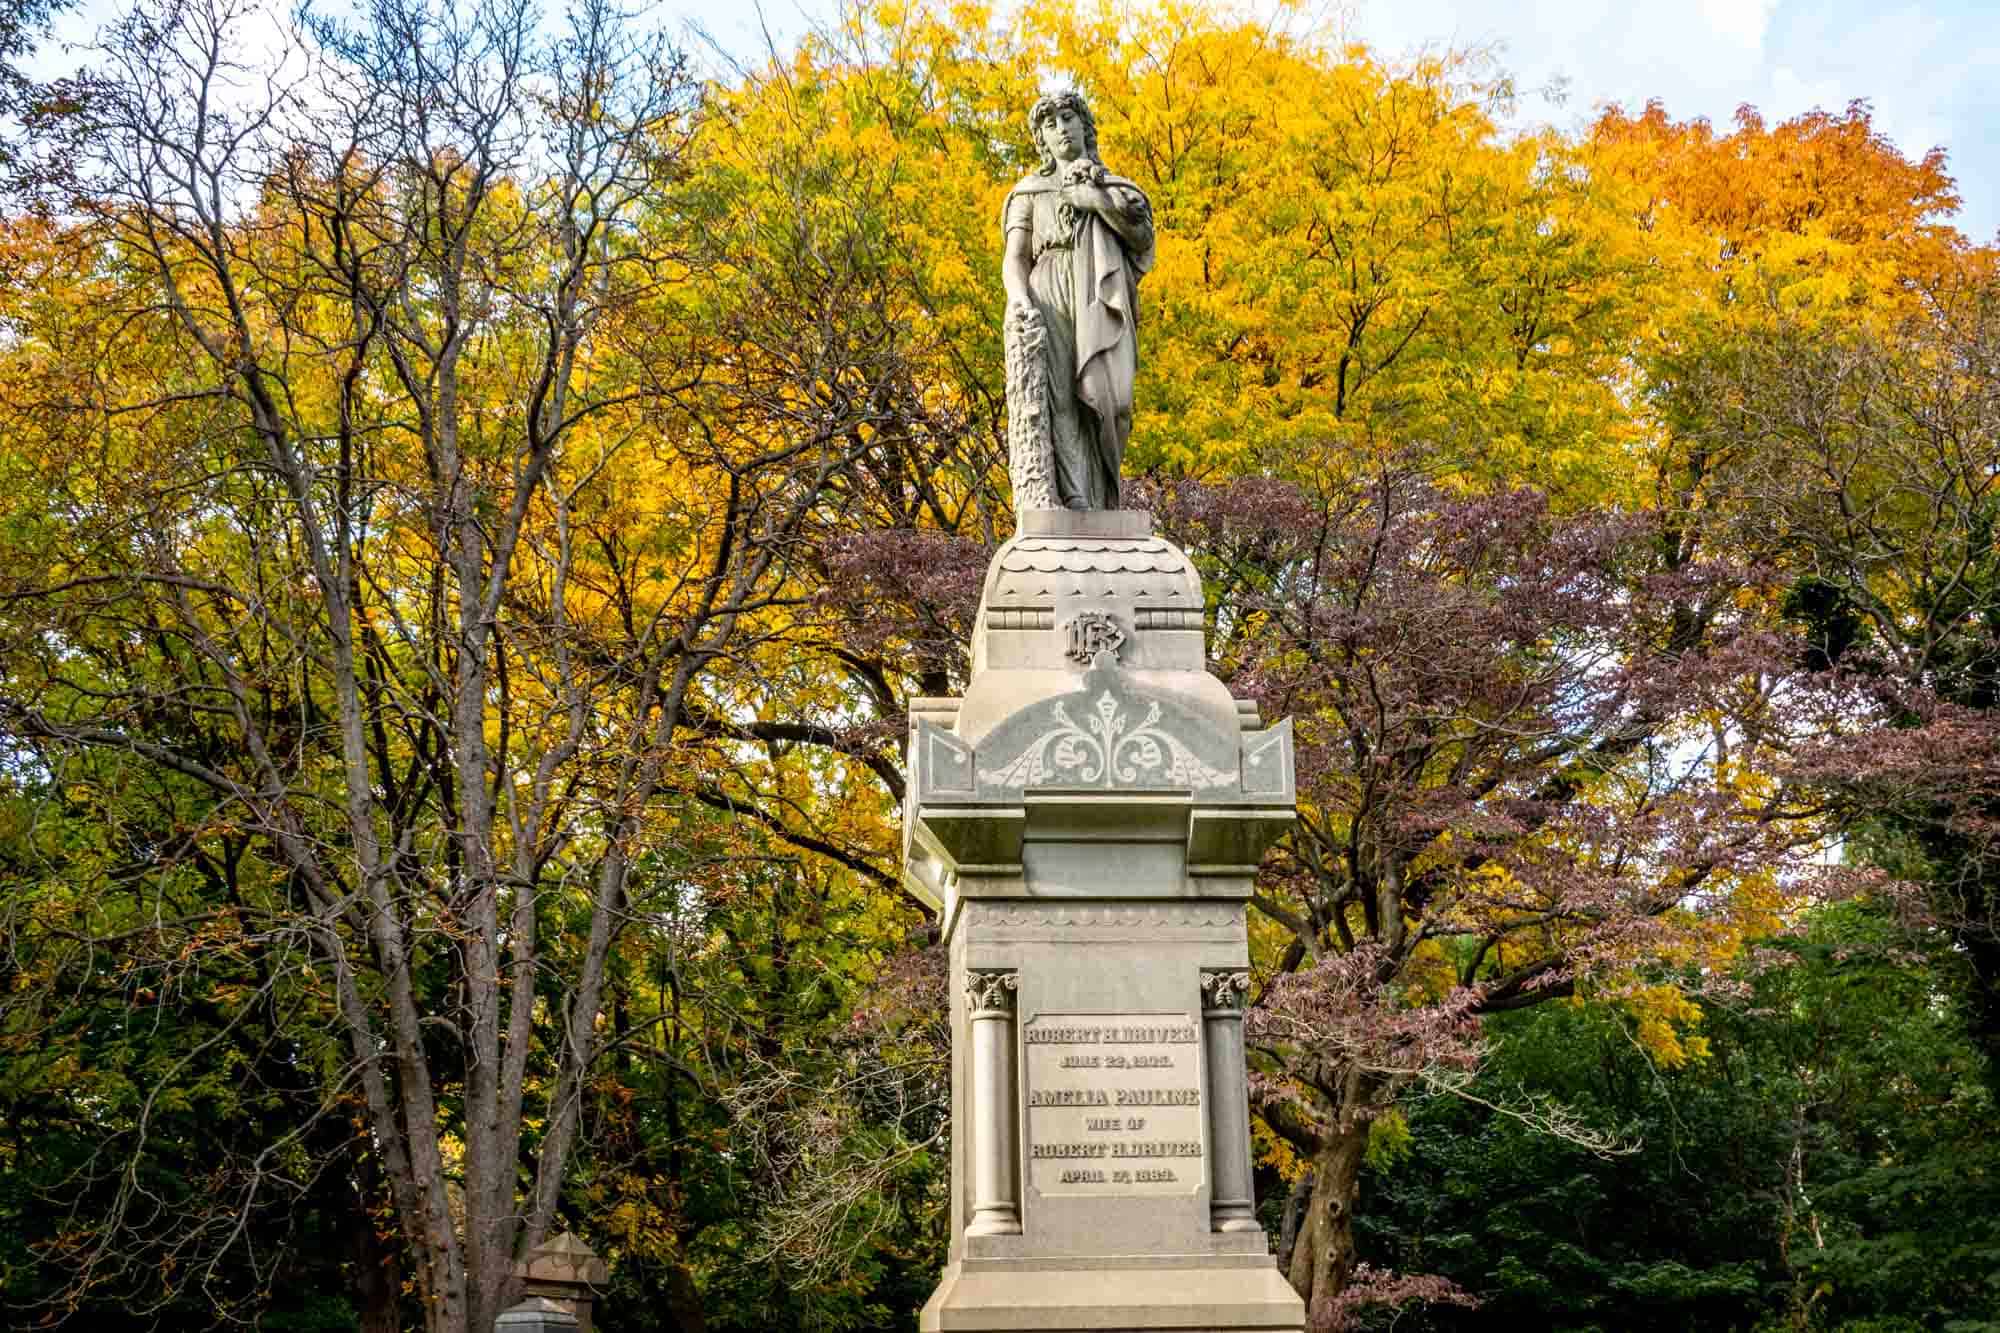 Large grave marker with the statue of a person standing on an elaborate platform in front of trees with bright fall leaves